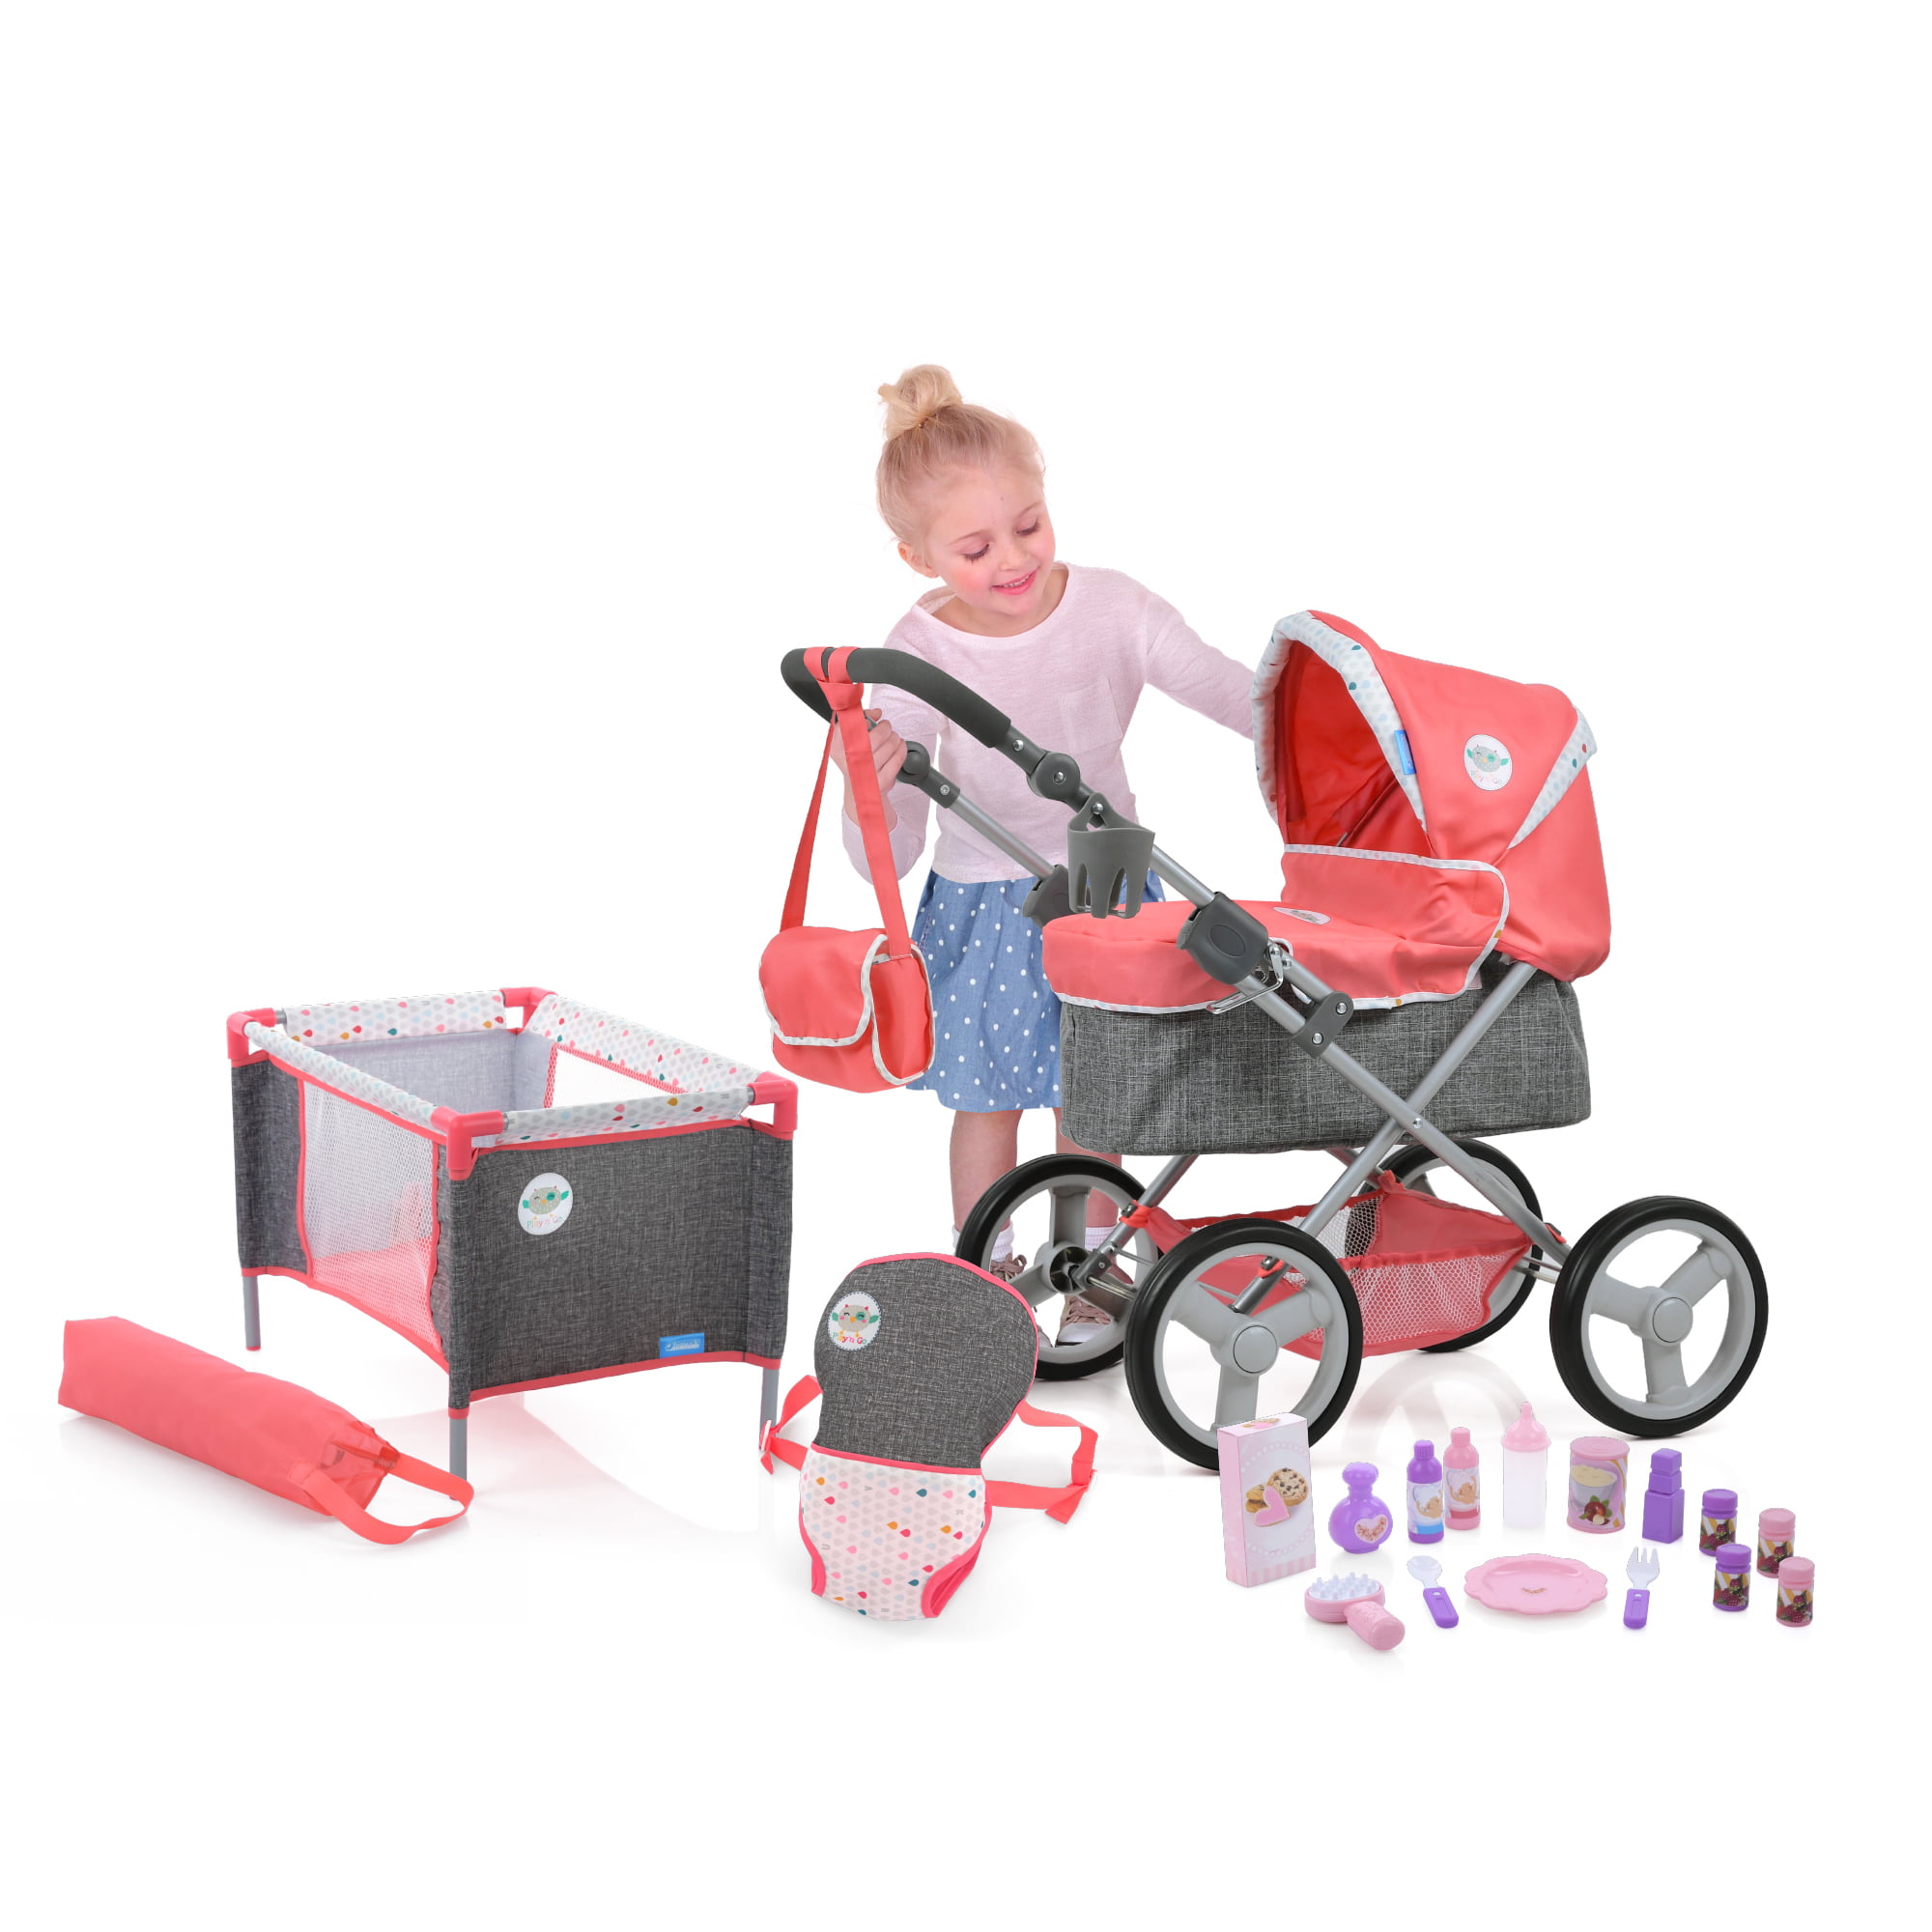 Hauck Play N Diaper Piece and Set Pram Bag, - Doll Play Carrier Toy Go 15 Front Yard